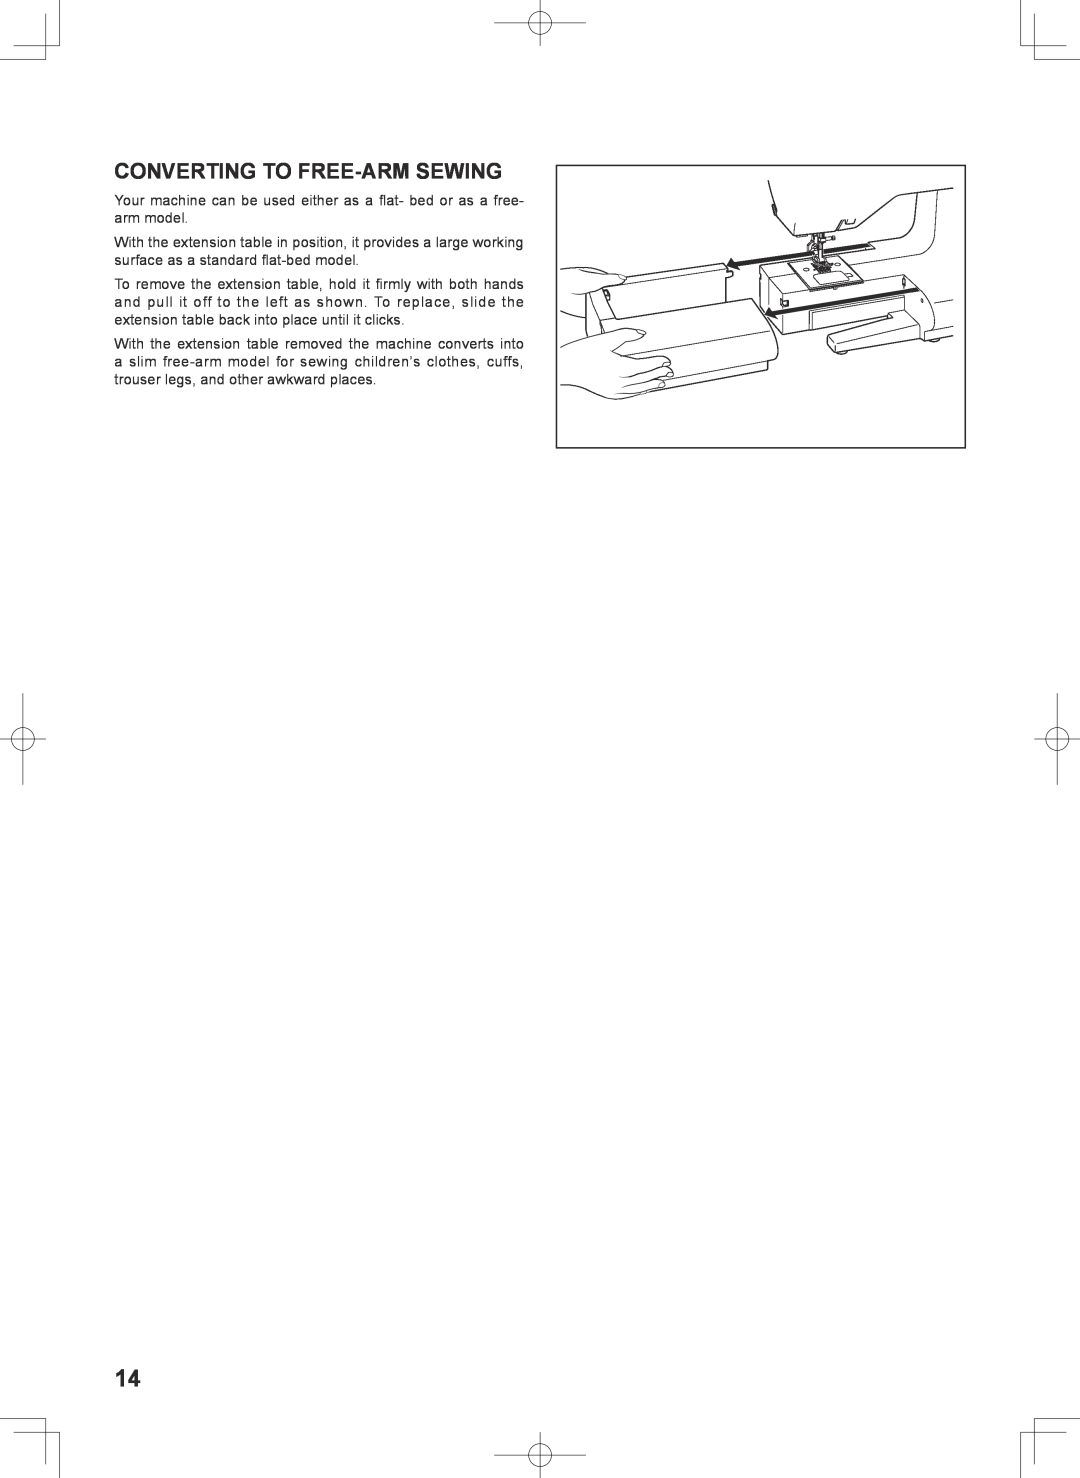 Singer 7467S instruction manual Converting To Free-Arm Sewing 